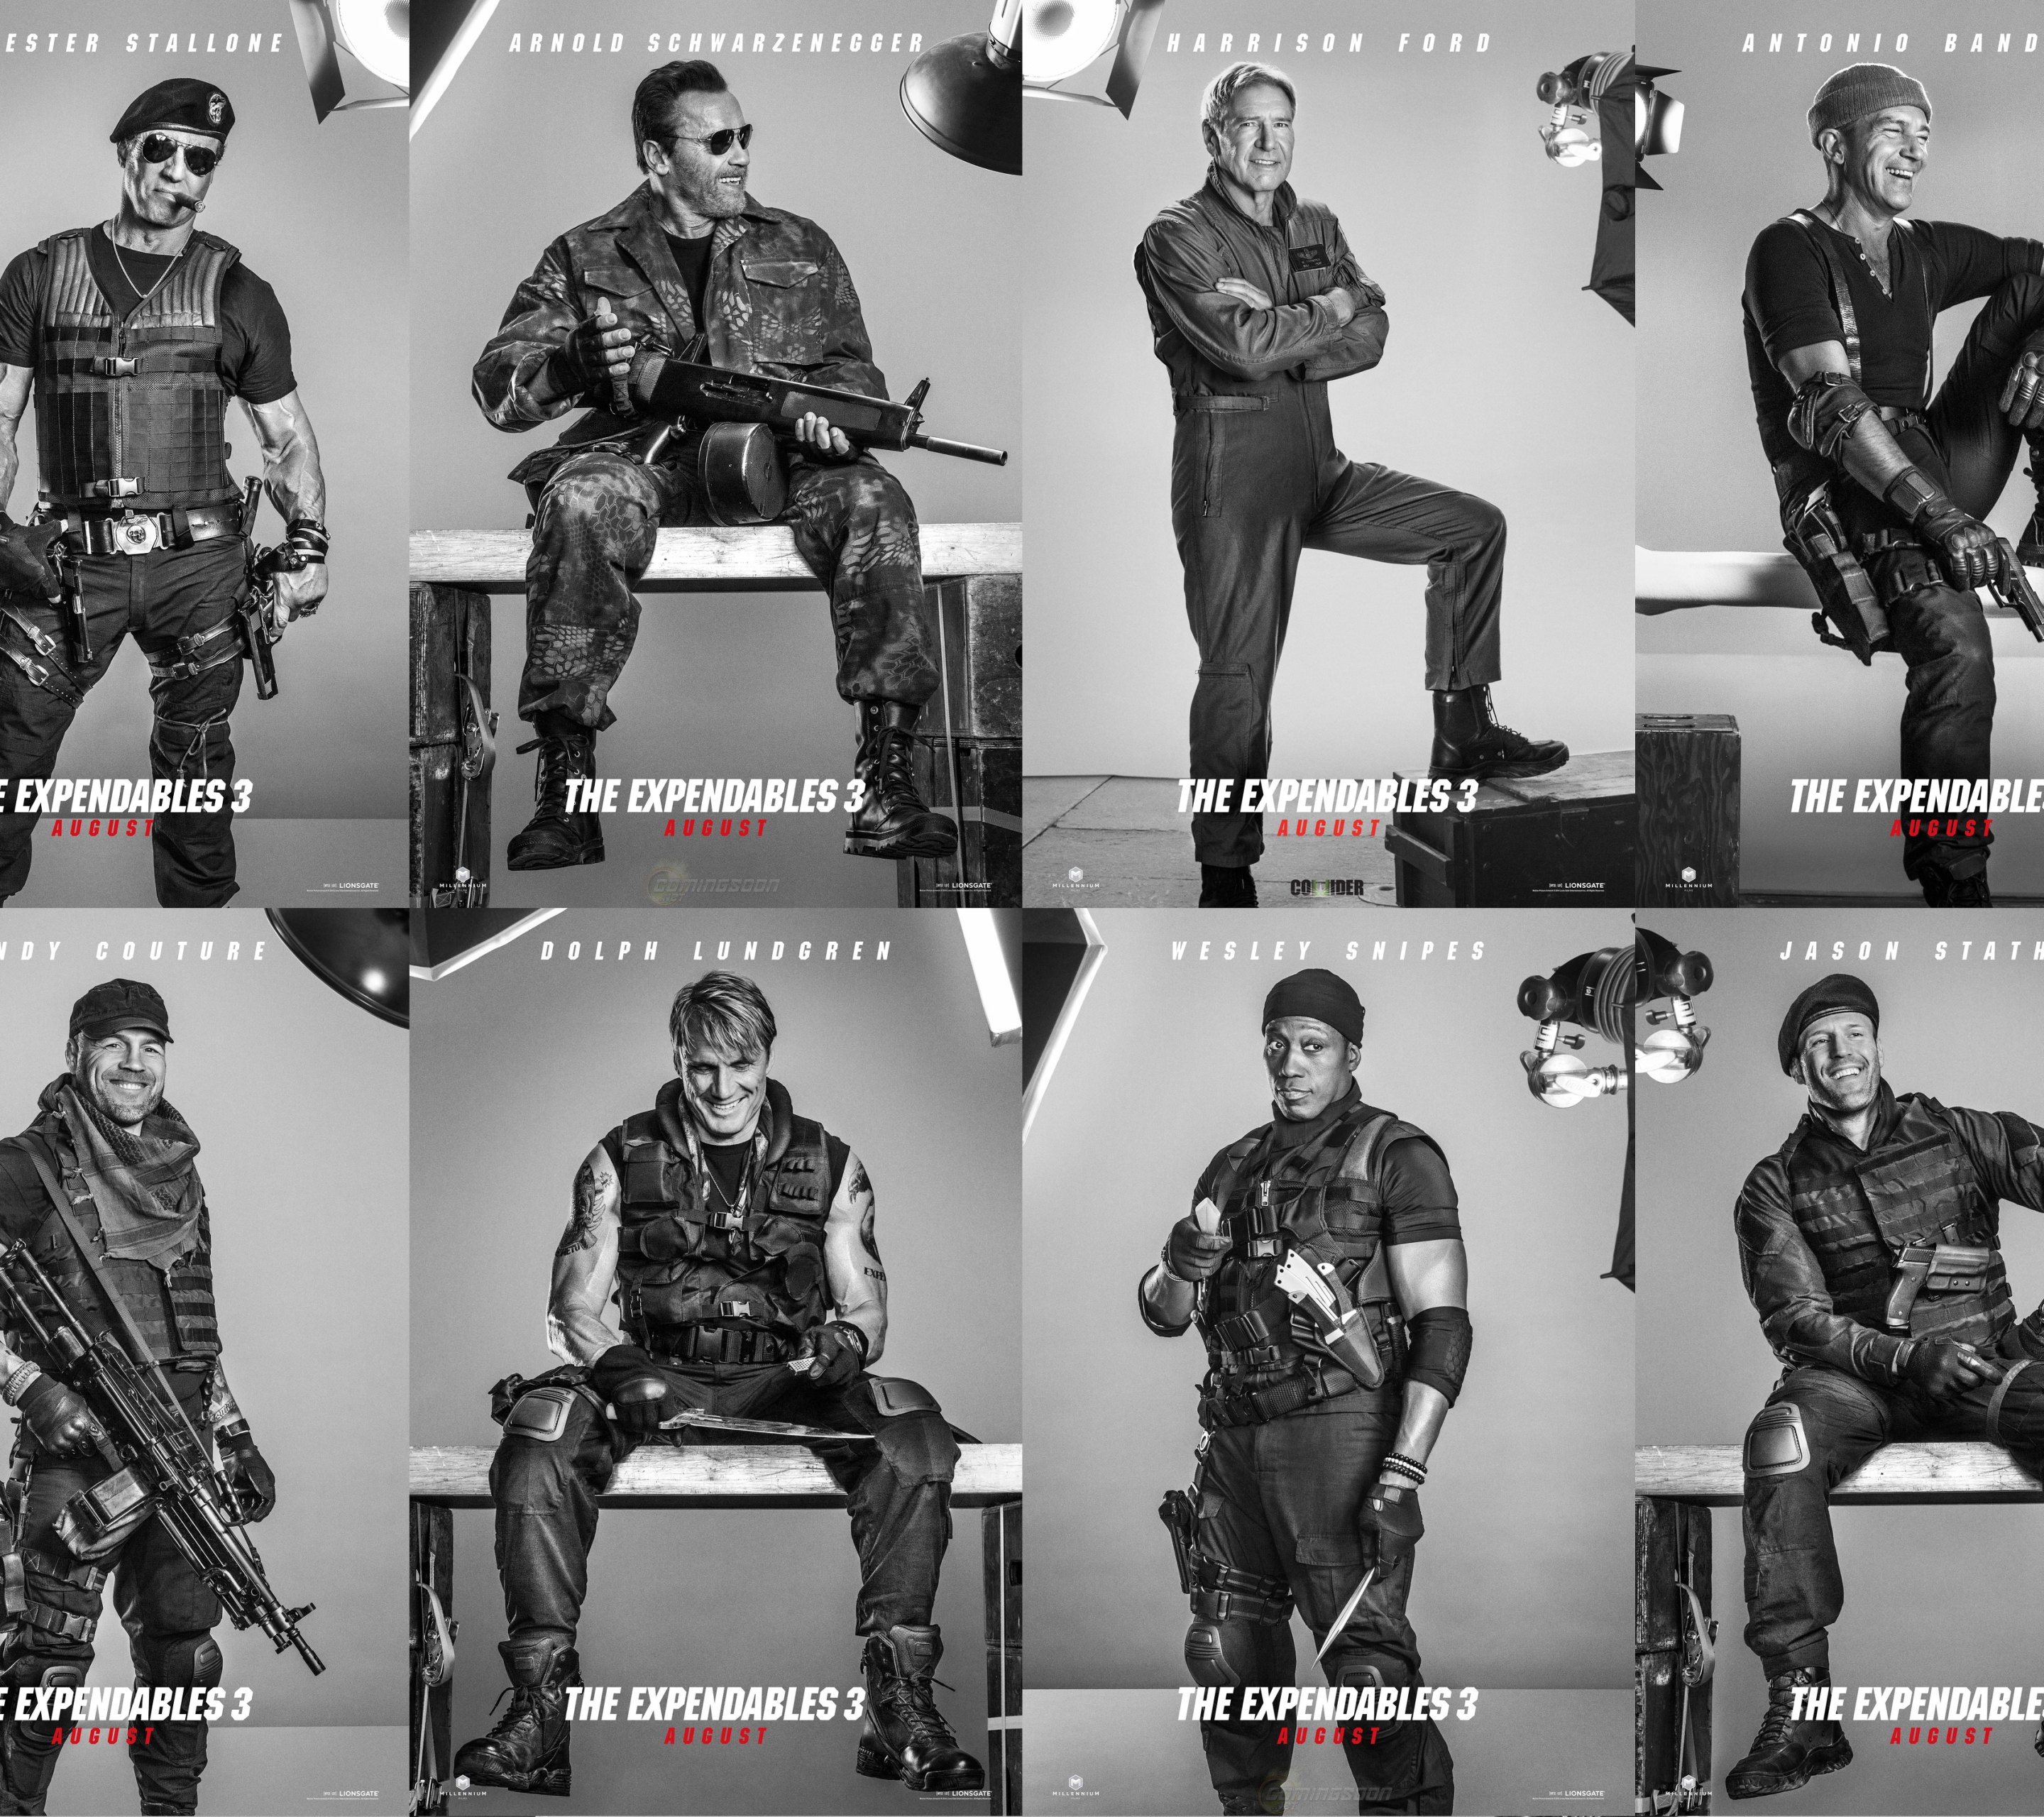 movie, the expendables 3, randy couture, sylvester stallone, arnold schwarzenegger, dolph lundgren, wesley snipes, harrison ford, jason statham, antonio banderas, barney ross, doc (the expendables), trench (the expendables), lee christmas, gunnar jensen, toll road, galgo (the expendables), max drummer, the expendables cellphone